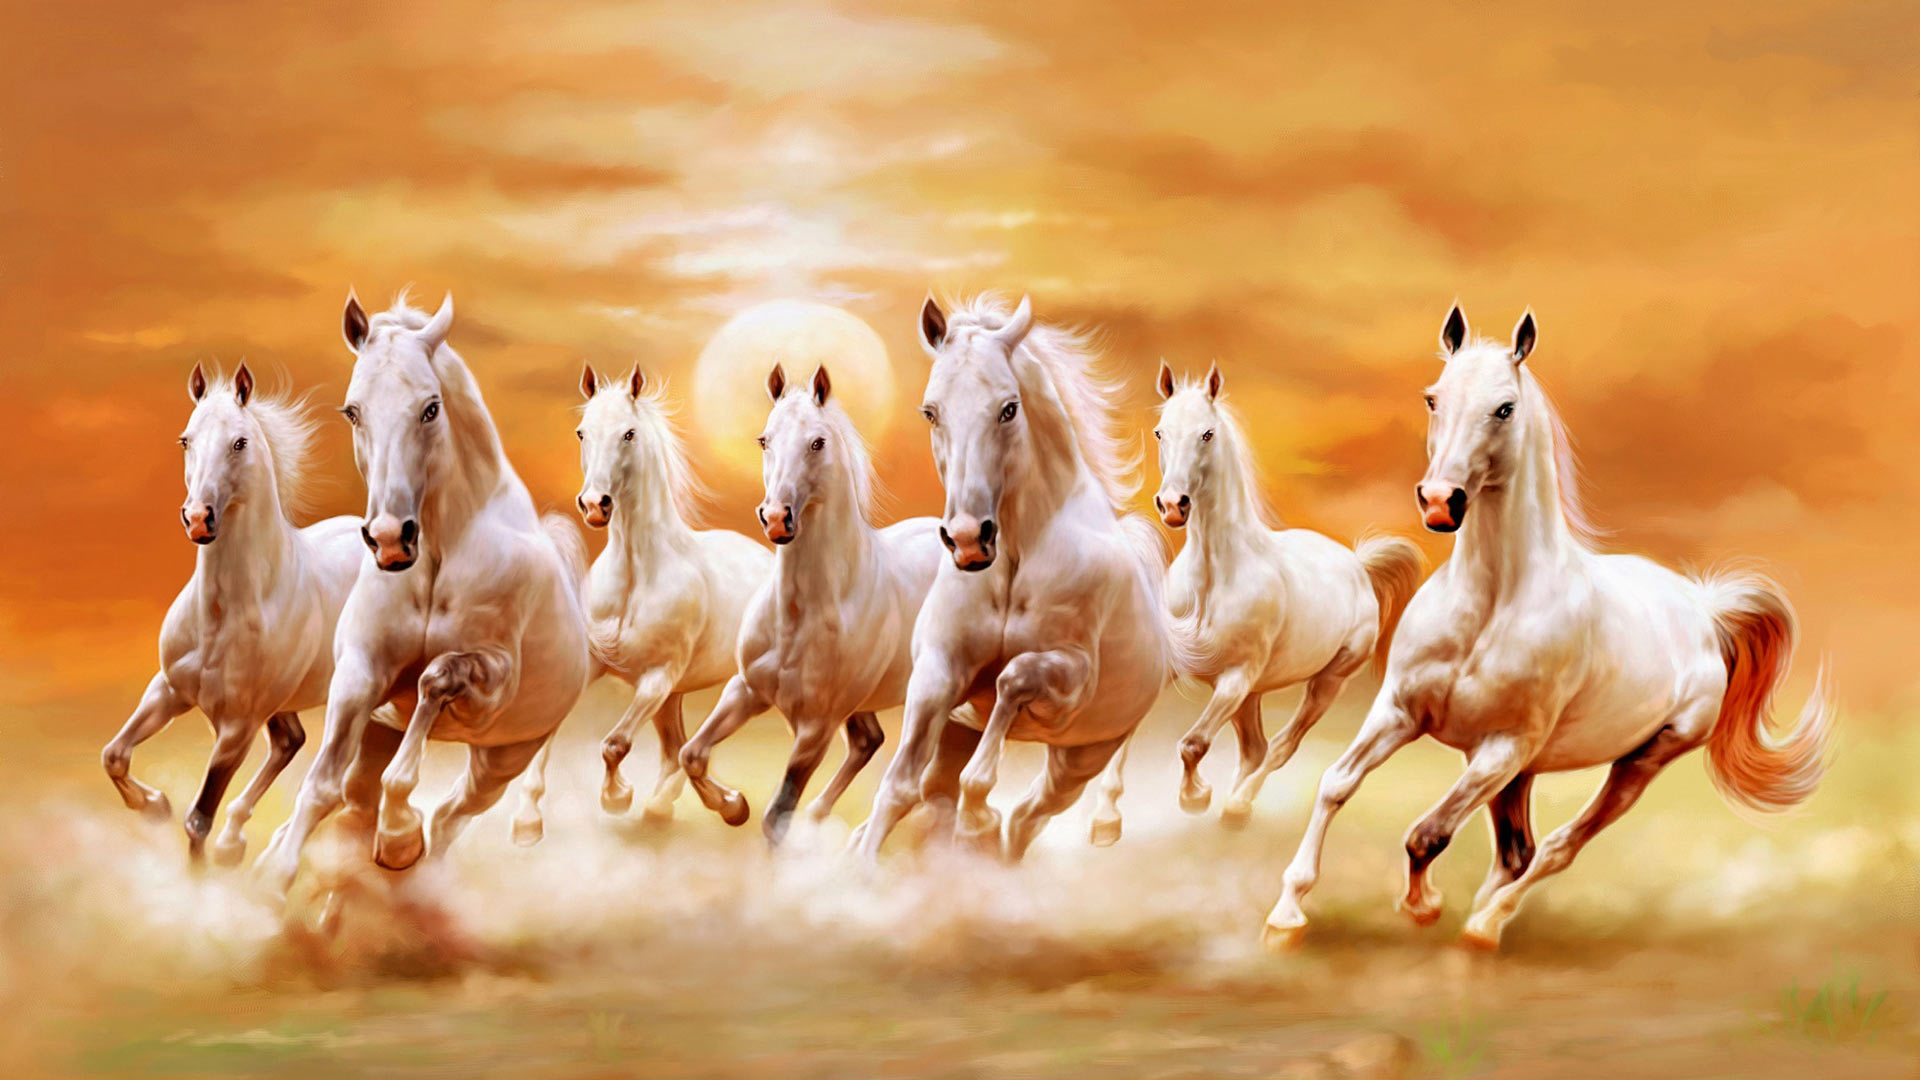 7 Horse HD Wallpapers 1920x1080